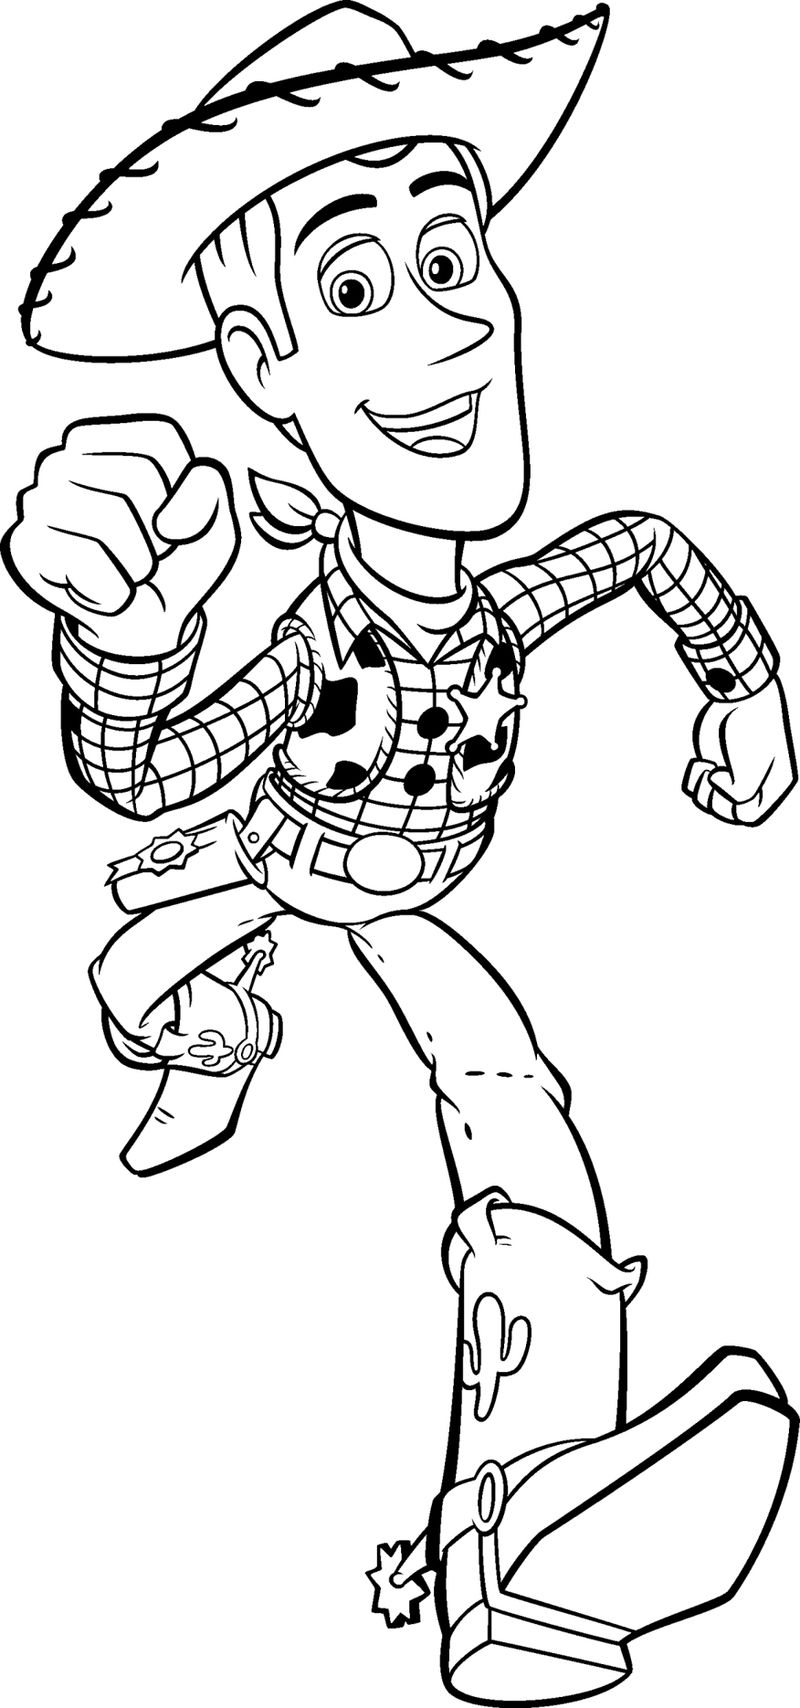 Toy Story Coloring Pages To Print